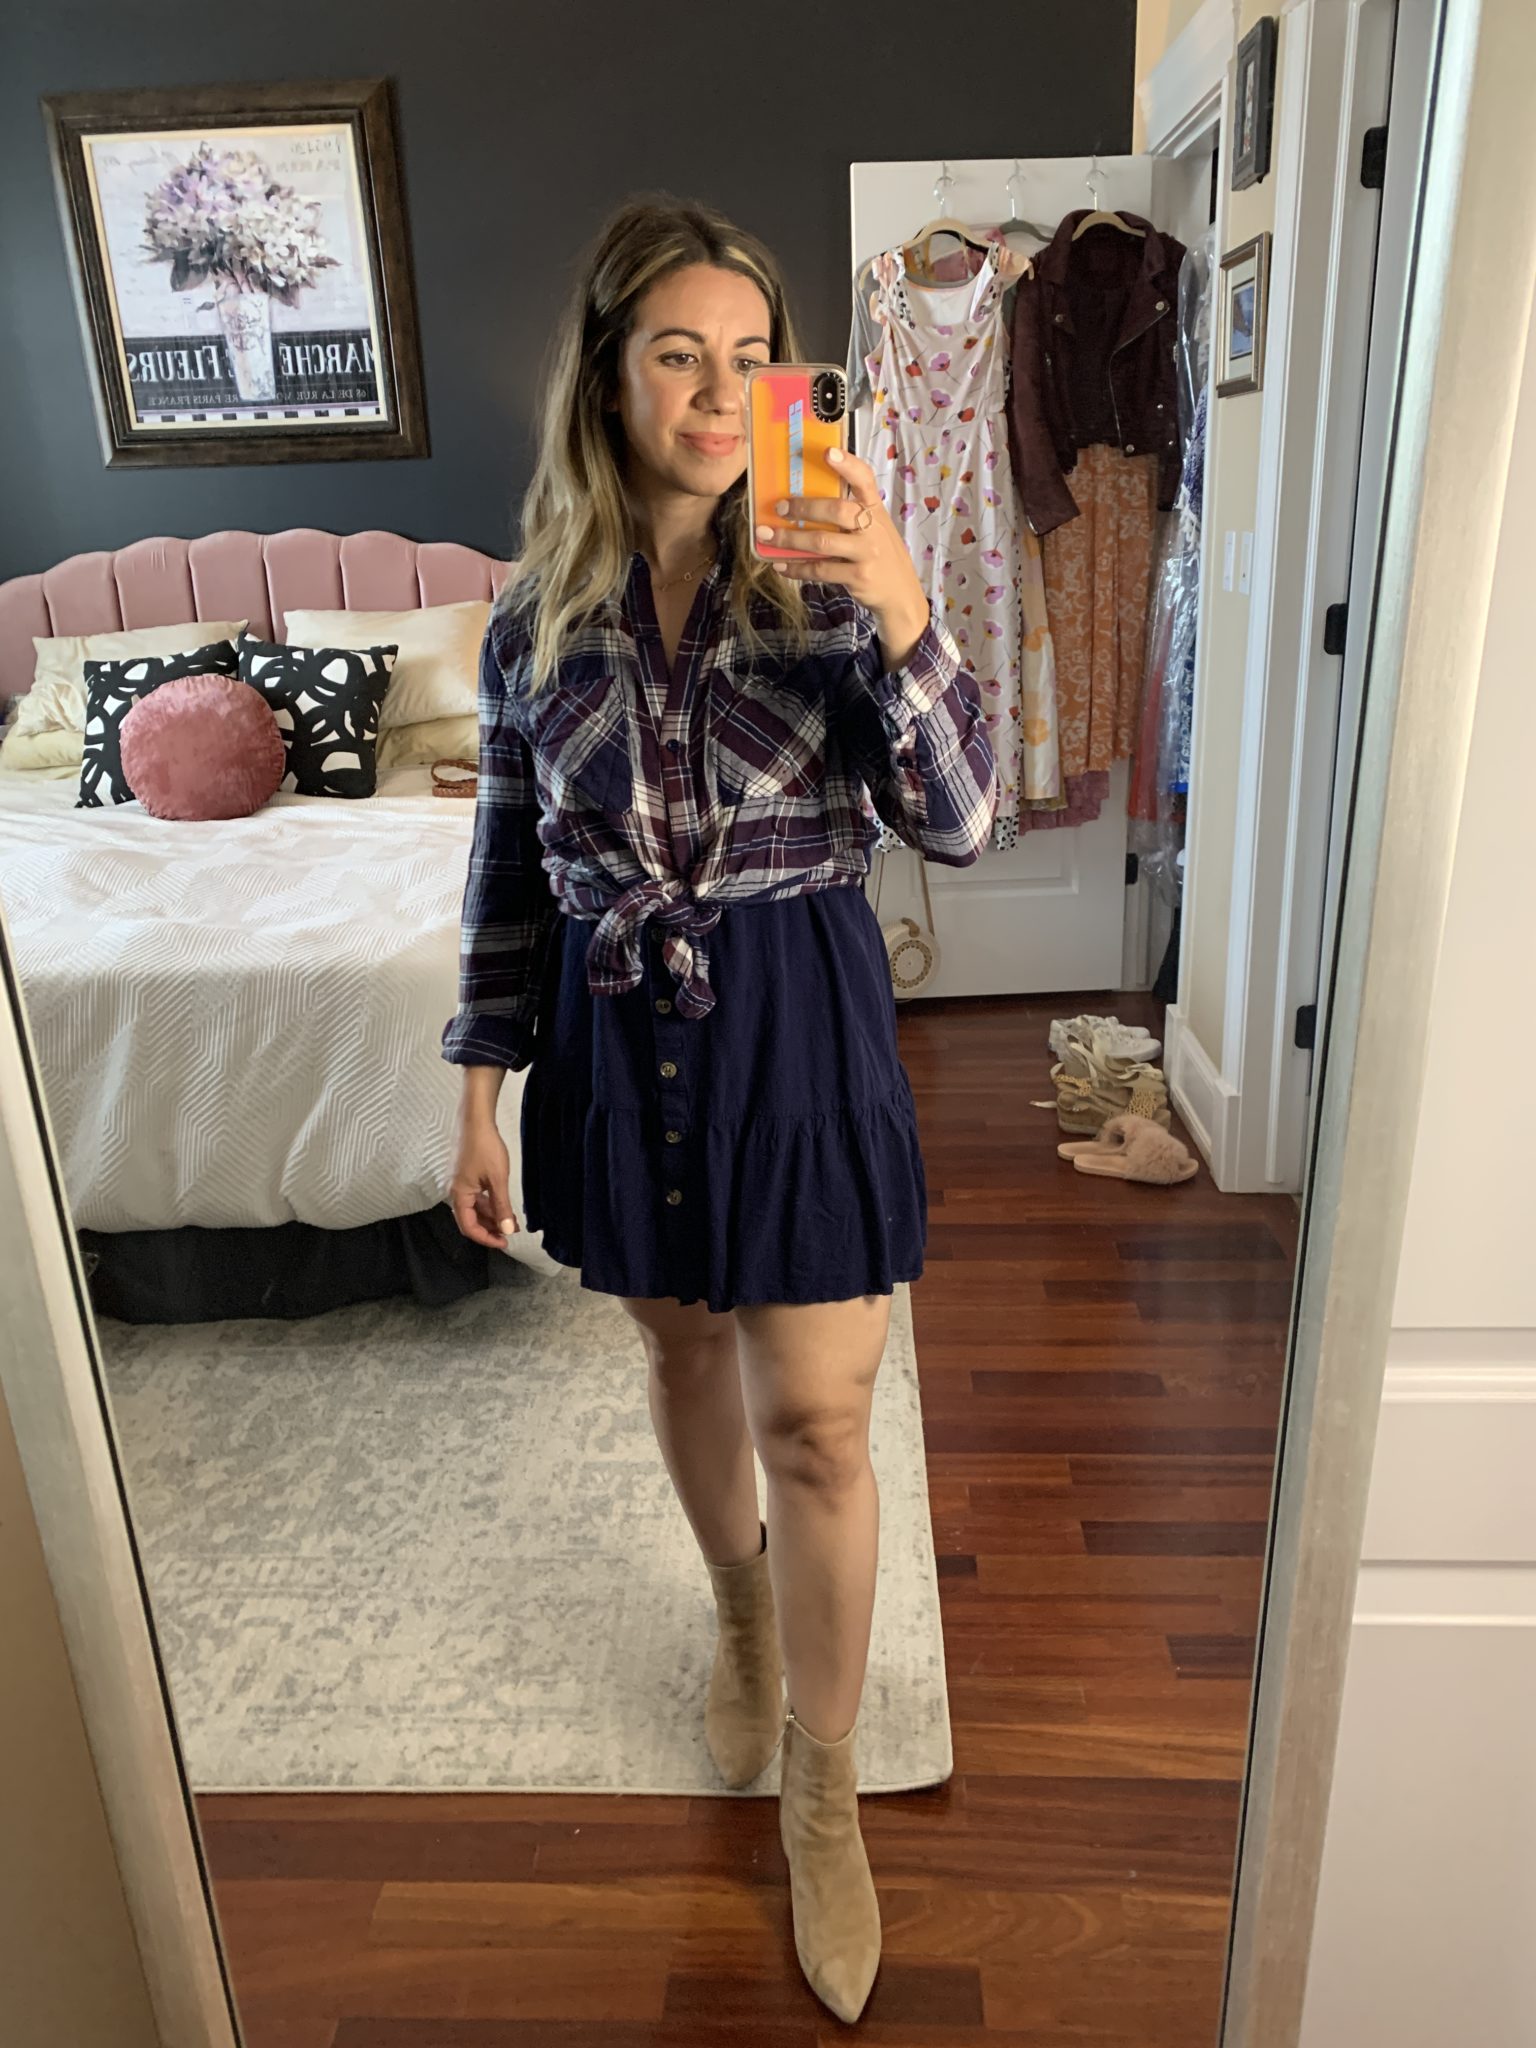 Sleeveless Dress by popular Chicago fashion blog, Glass of Glam: image of a woman standing in her bedroom and wearing a Amazon Imysty Womens Polka Dot V Neck Button Down Ruffles Loose Mini Short T-Shirt Dress, plaid button up shirt, and tan suede booties. 